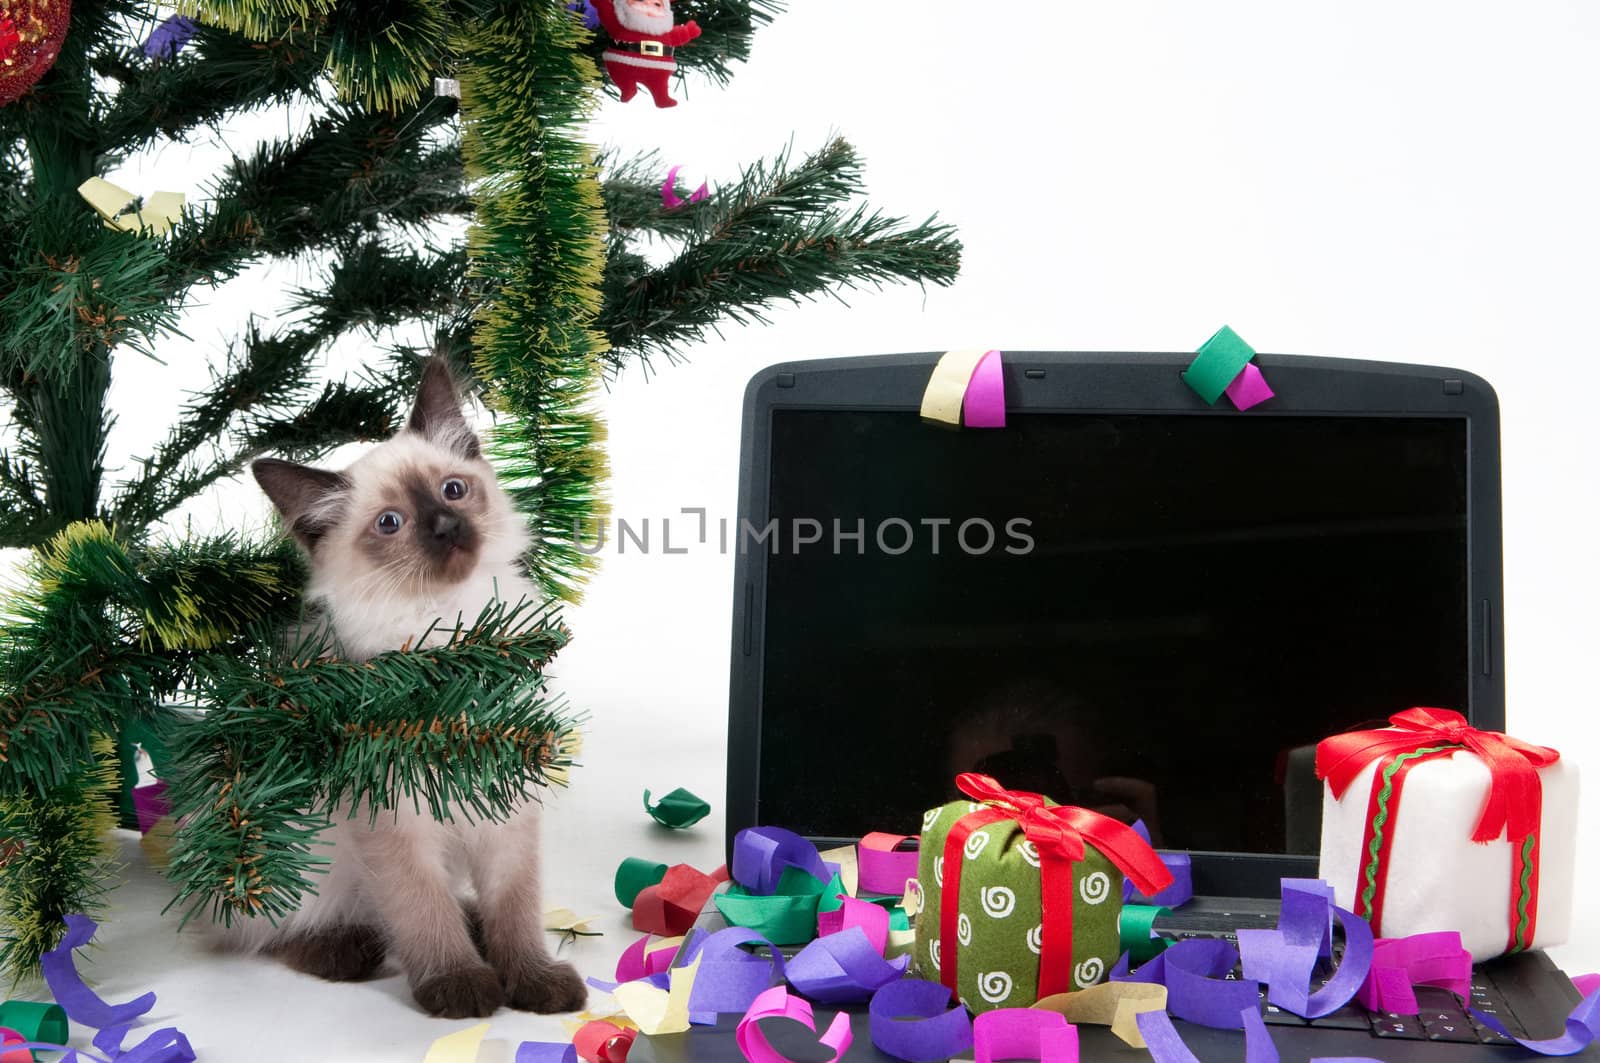 Kitten and laptop under Christmas tree by Erchog